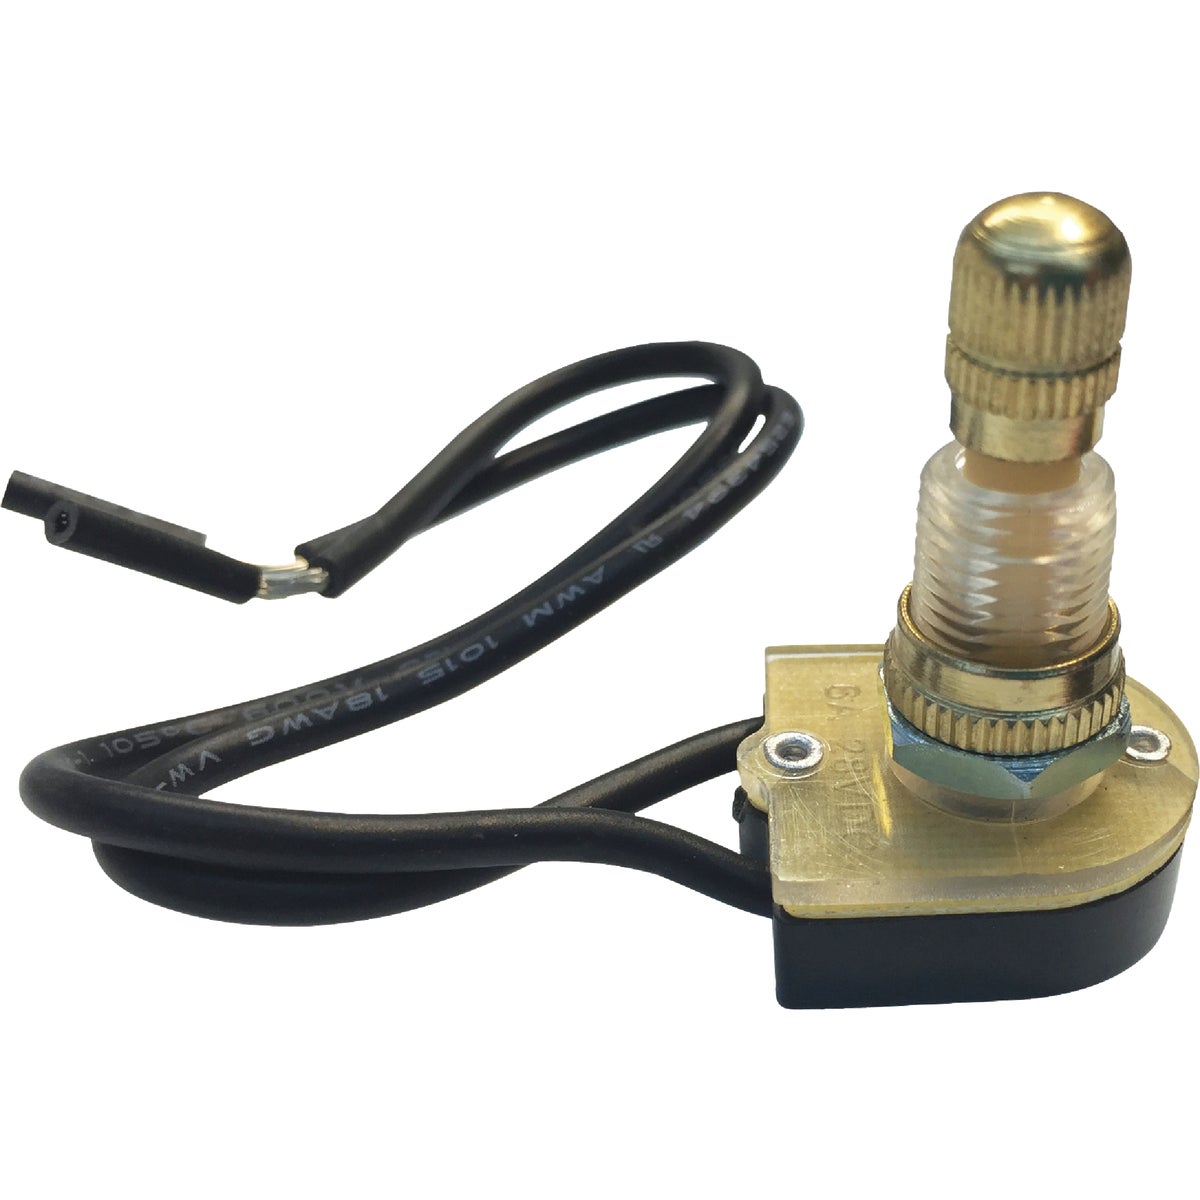 Item 517763, Single pole, single throw On/Off single current rotary switch.